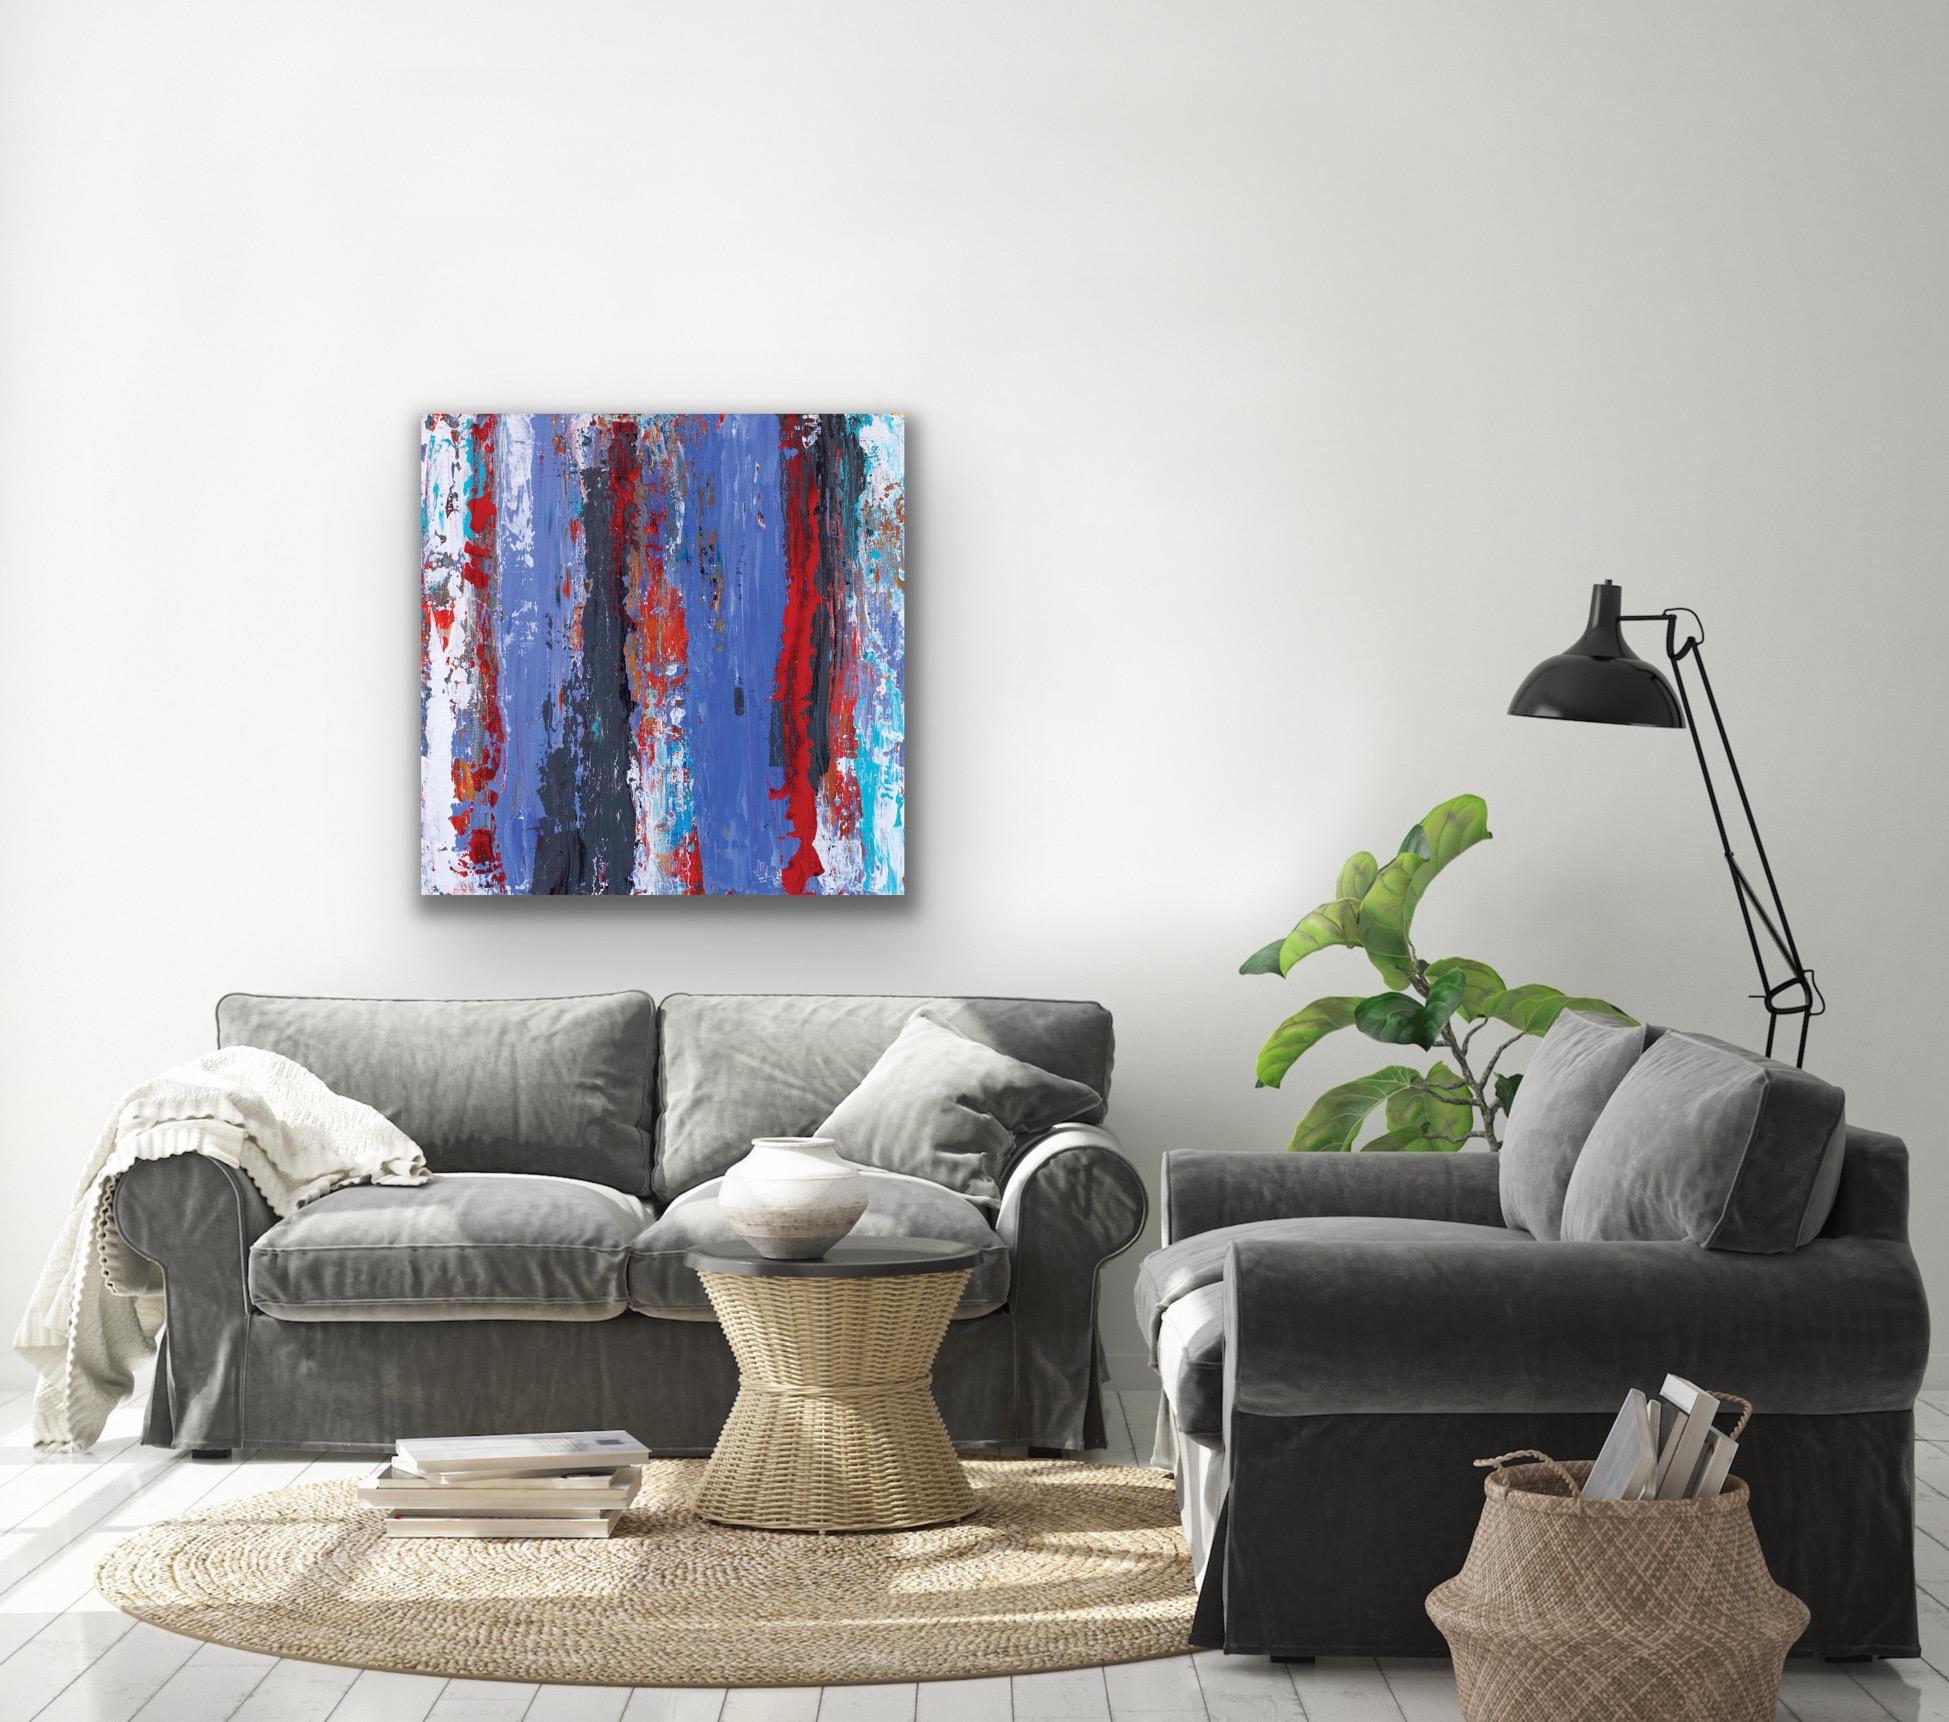 This modern abstract painting is printed on a lightweight metal composite and is suitable for indoor or outdoor decor. This open edition print of Celeste Reiter's original painting is signed by the artist. 

-Artist: Celeste Reiter
-Open Edition -